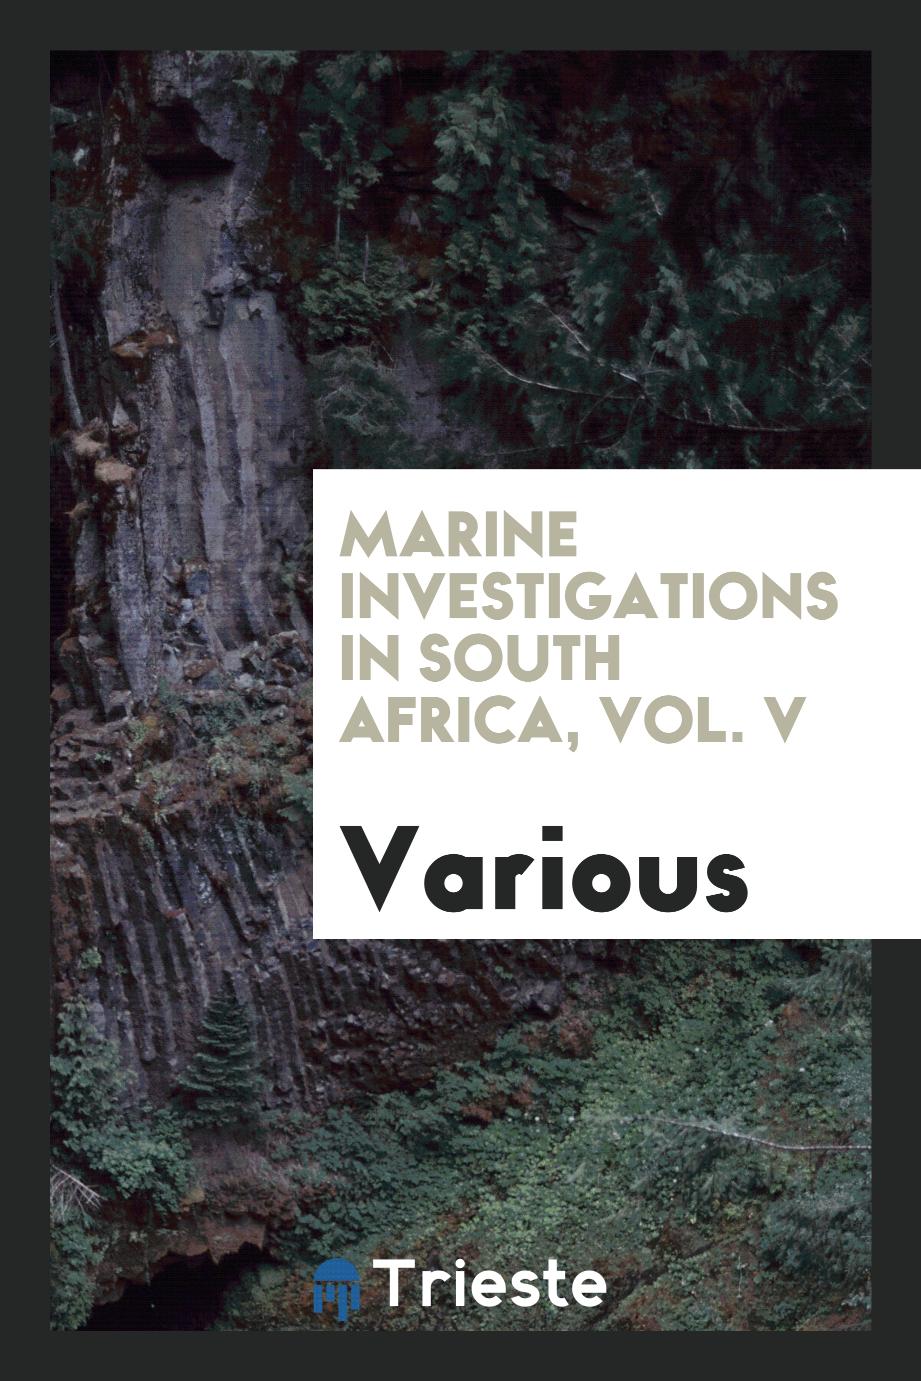 Marine investigations in South Africa, Vol. V